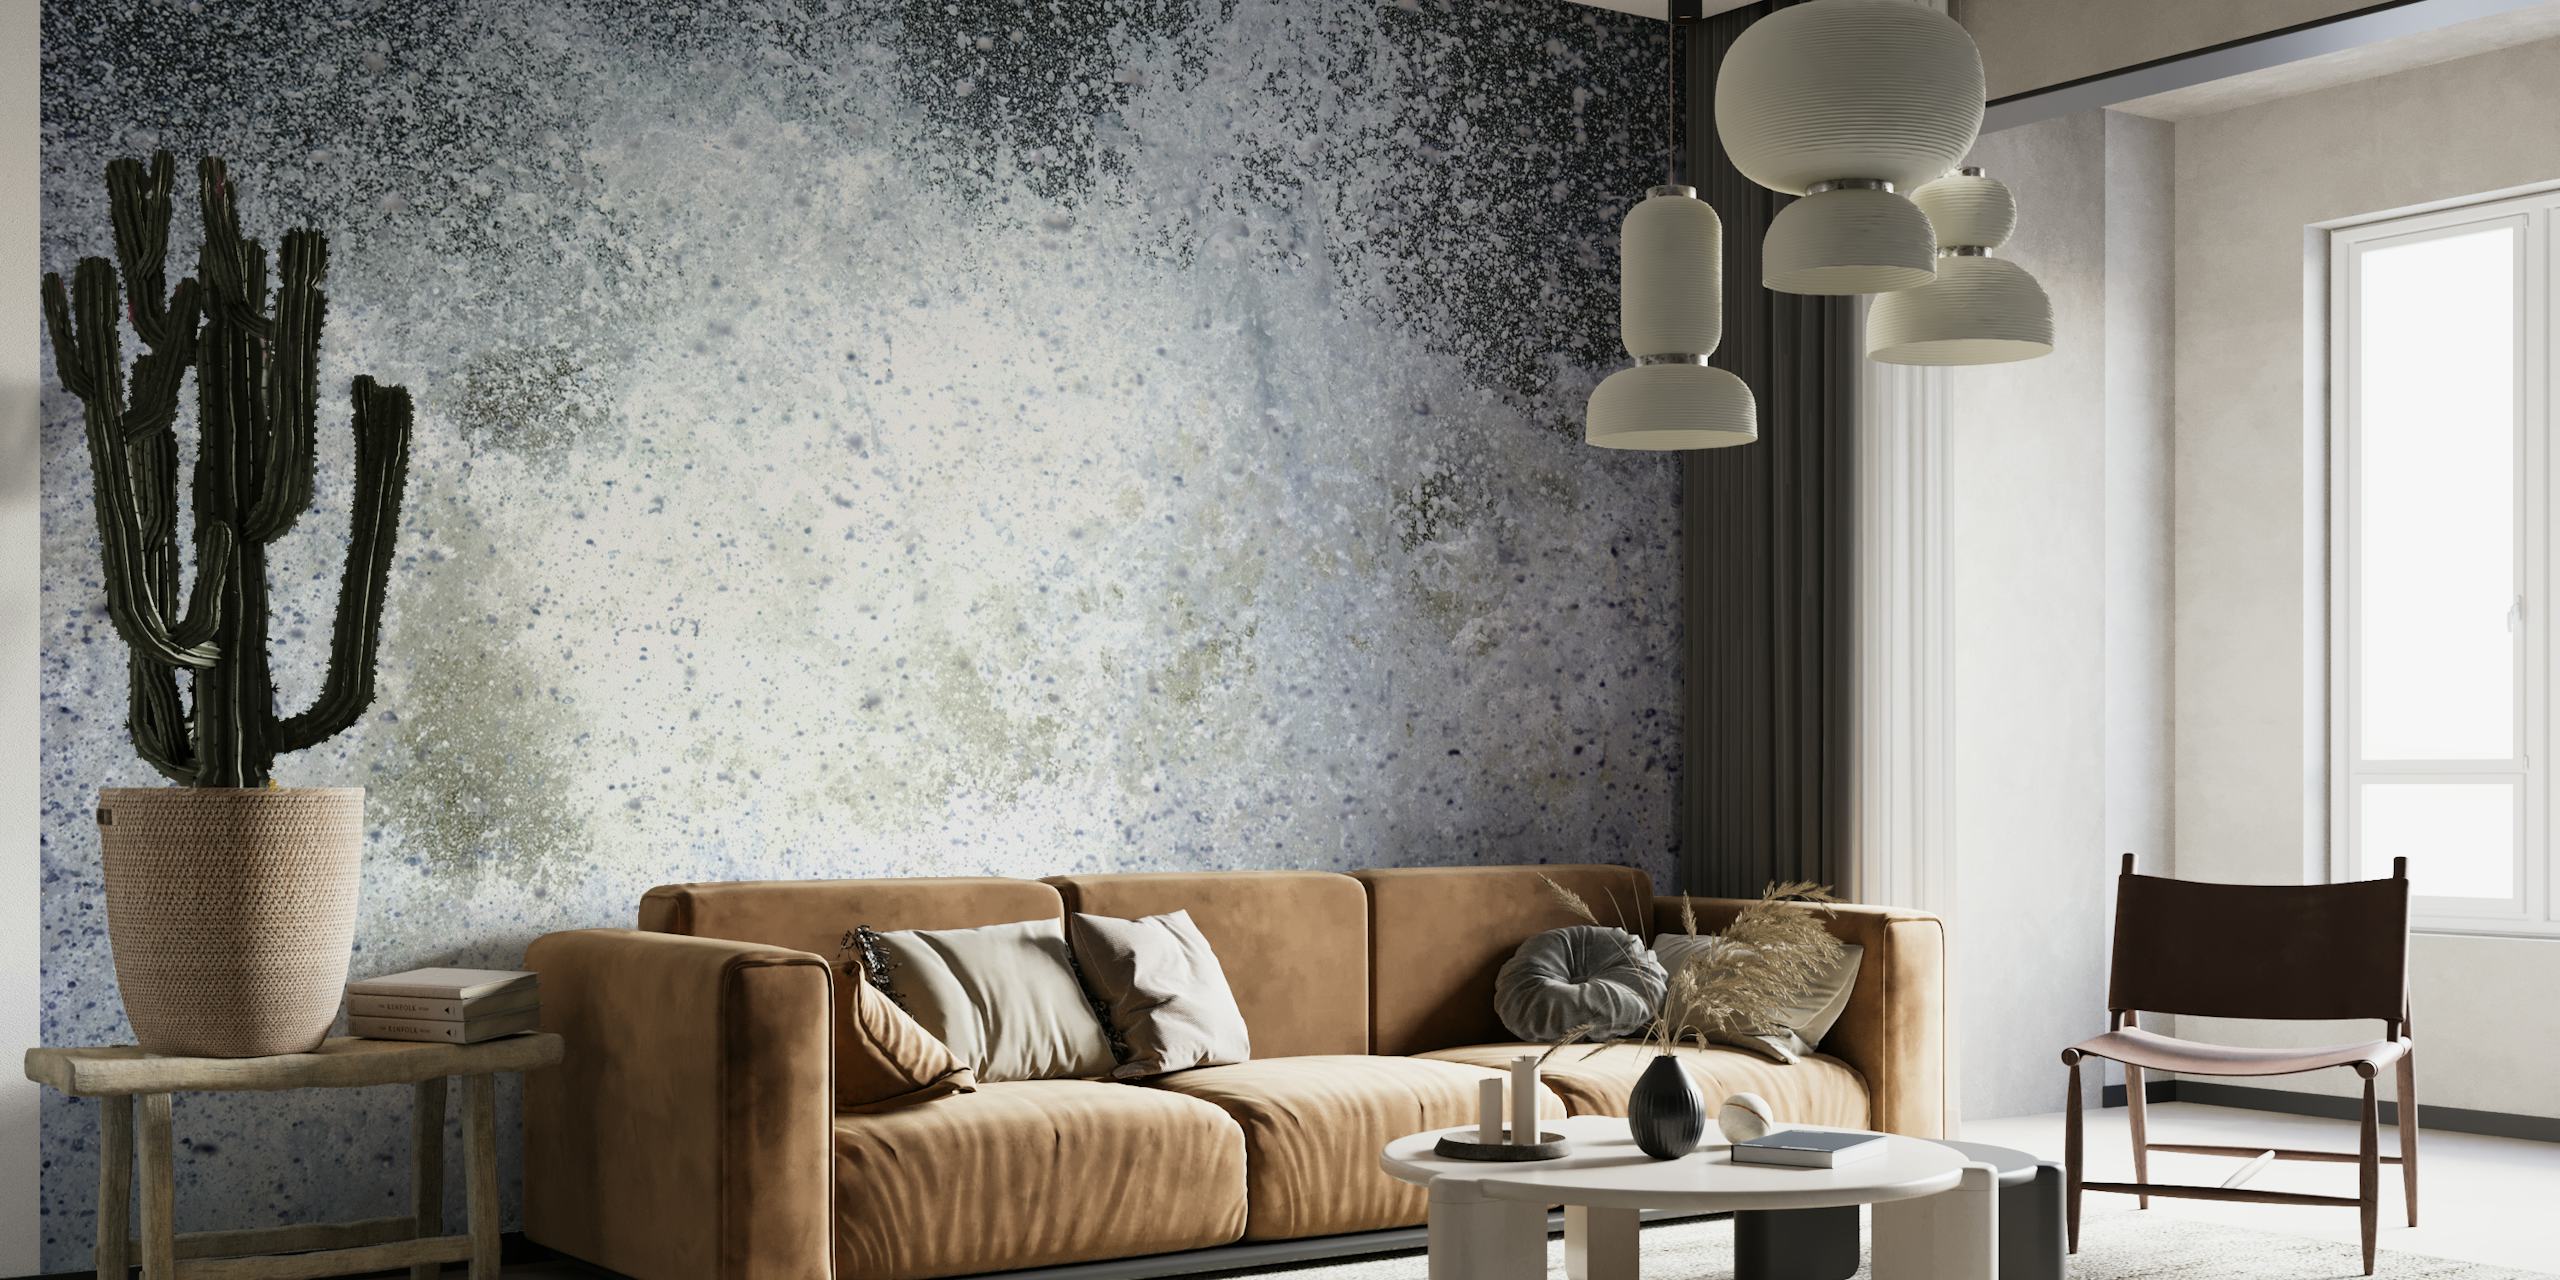 Abstract wall mural with explosion-like pattern in shades of gray and hints of color, entitled 'Implosion I'